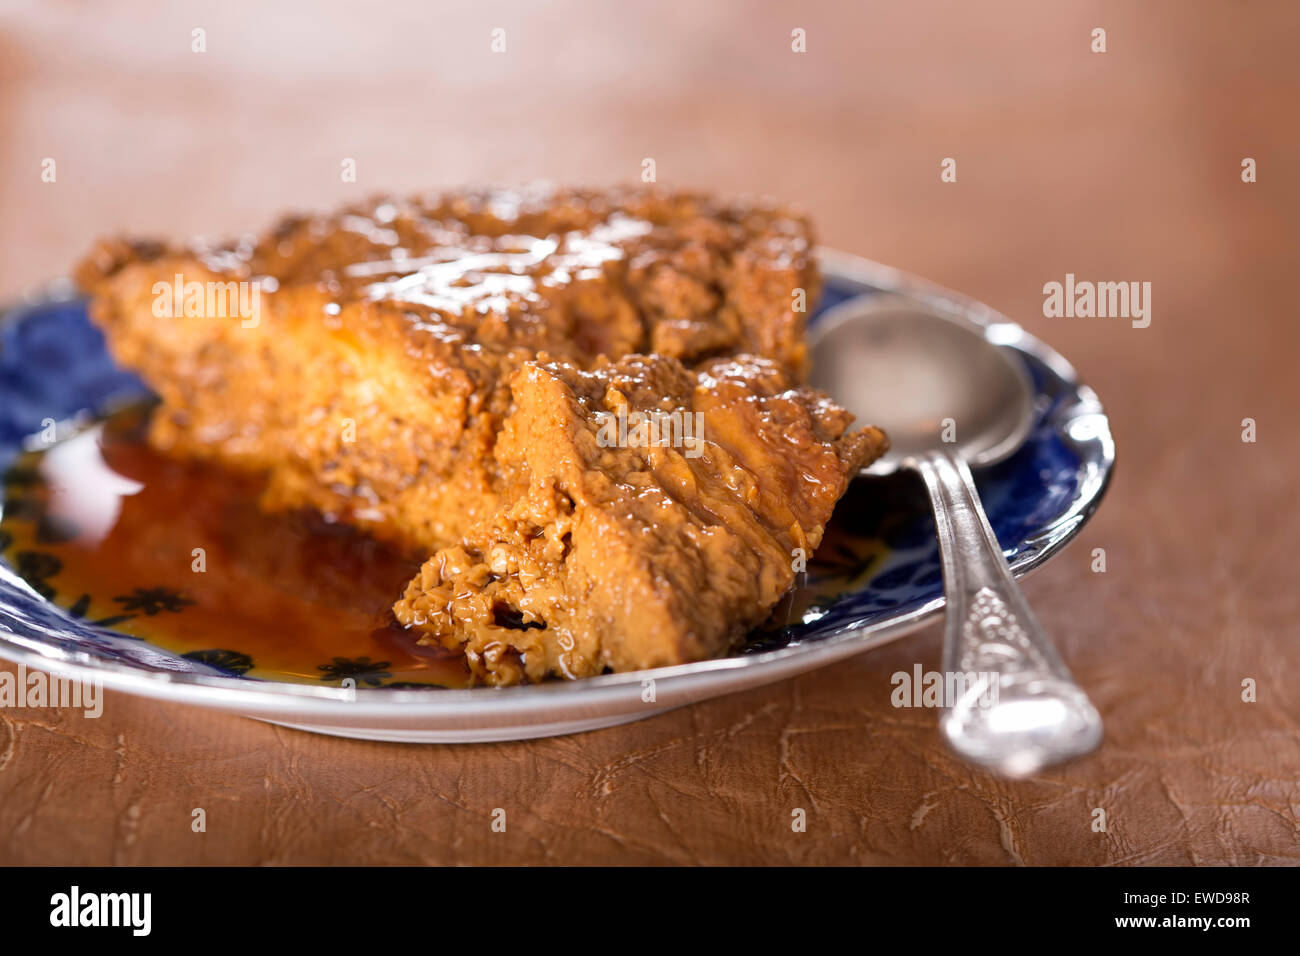 French creme caramel dessert or flan on a blue plate Stock Photo